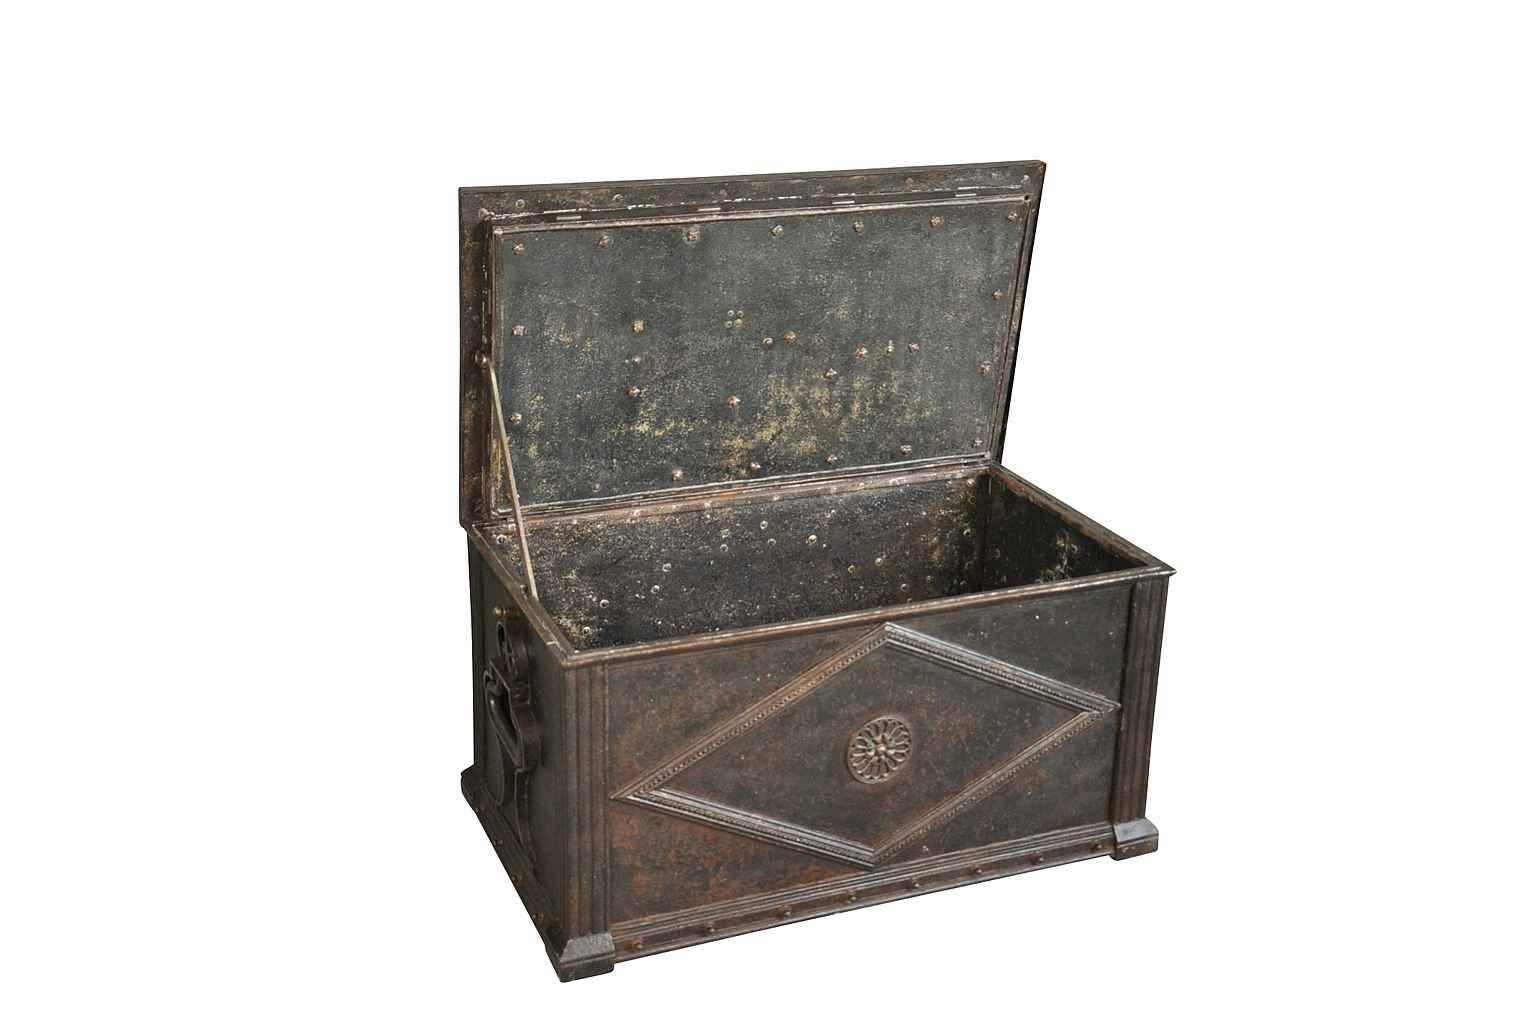 Iron Exceptional Early 18th Century Italian Coffre or Strong Trunk